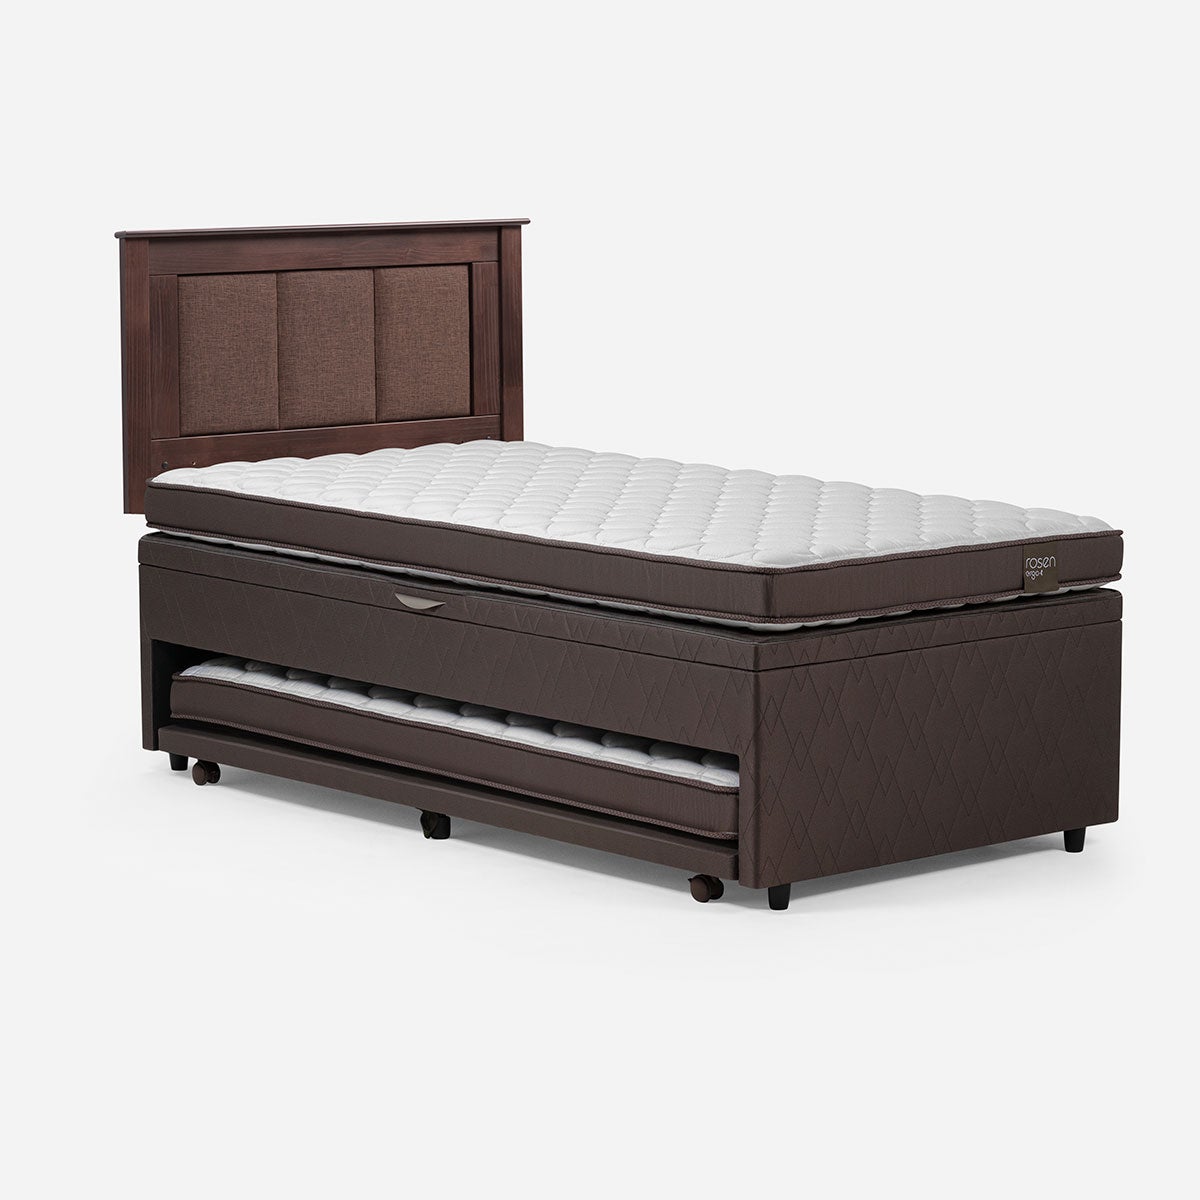 Bed Boxet Ergo T New 1